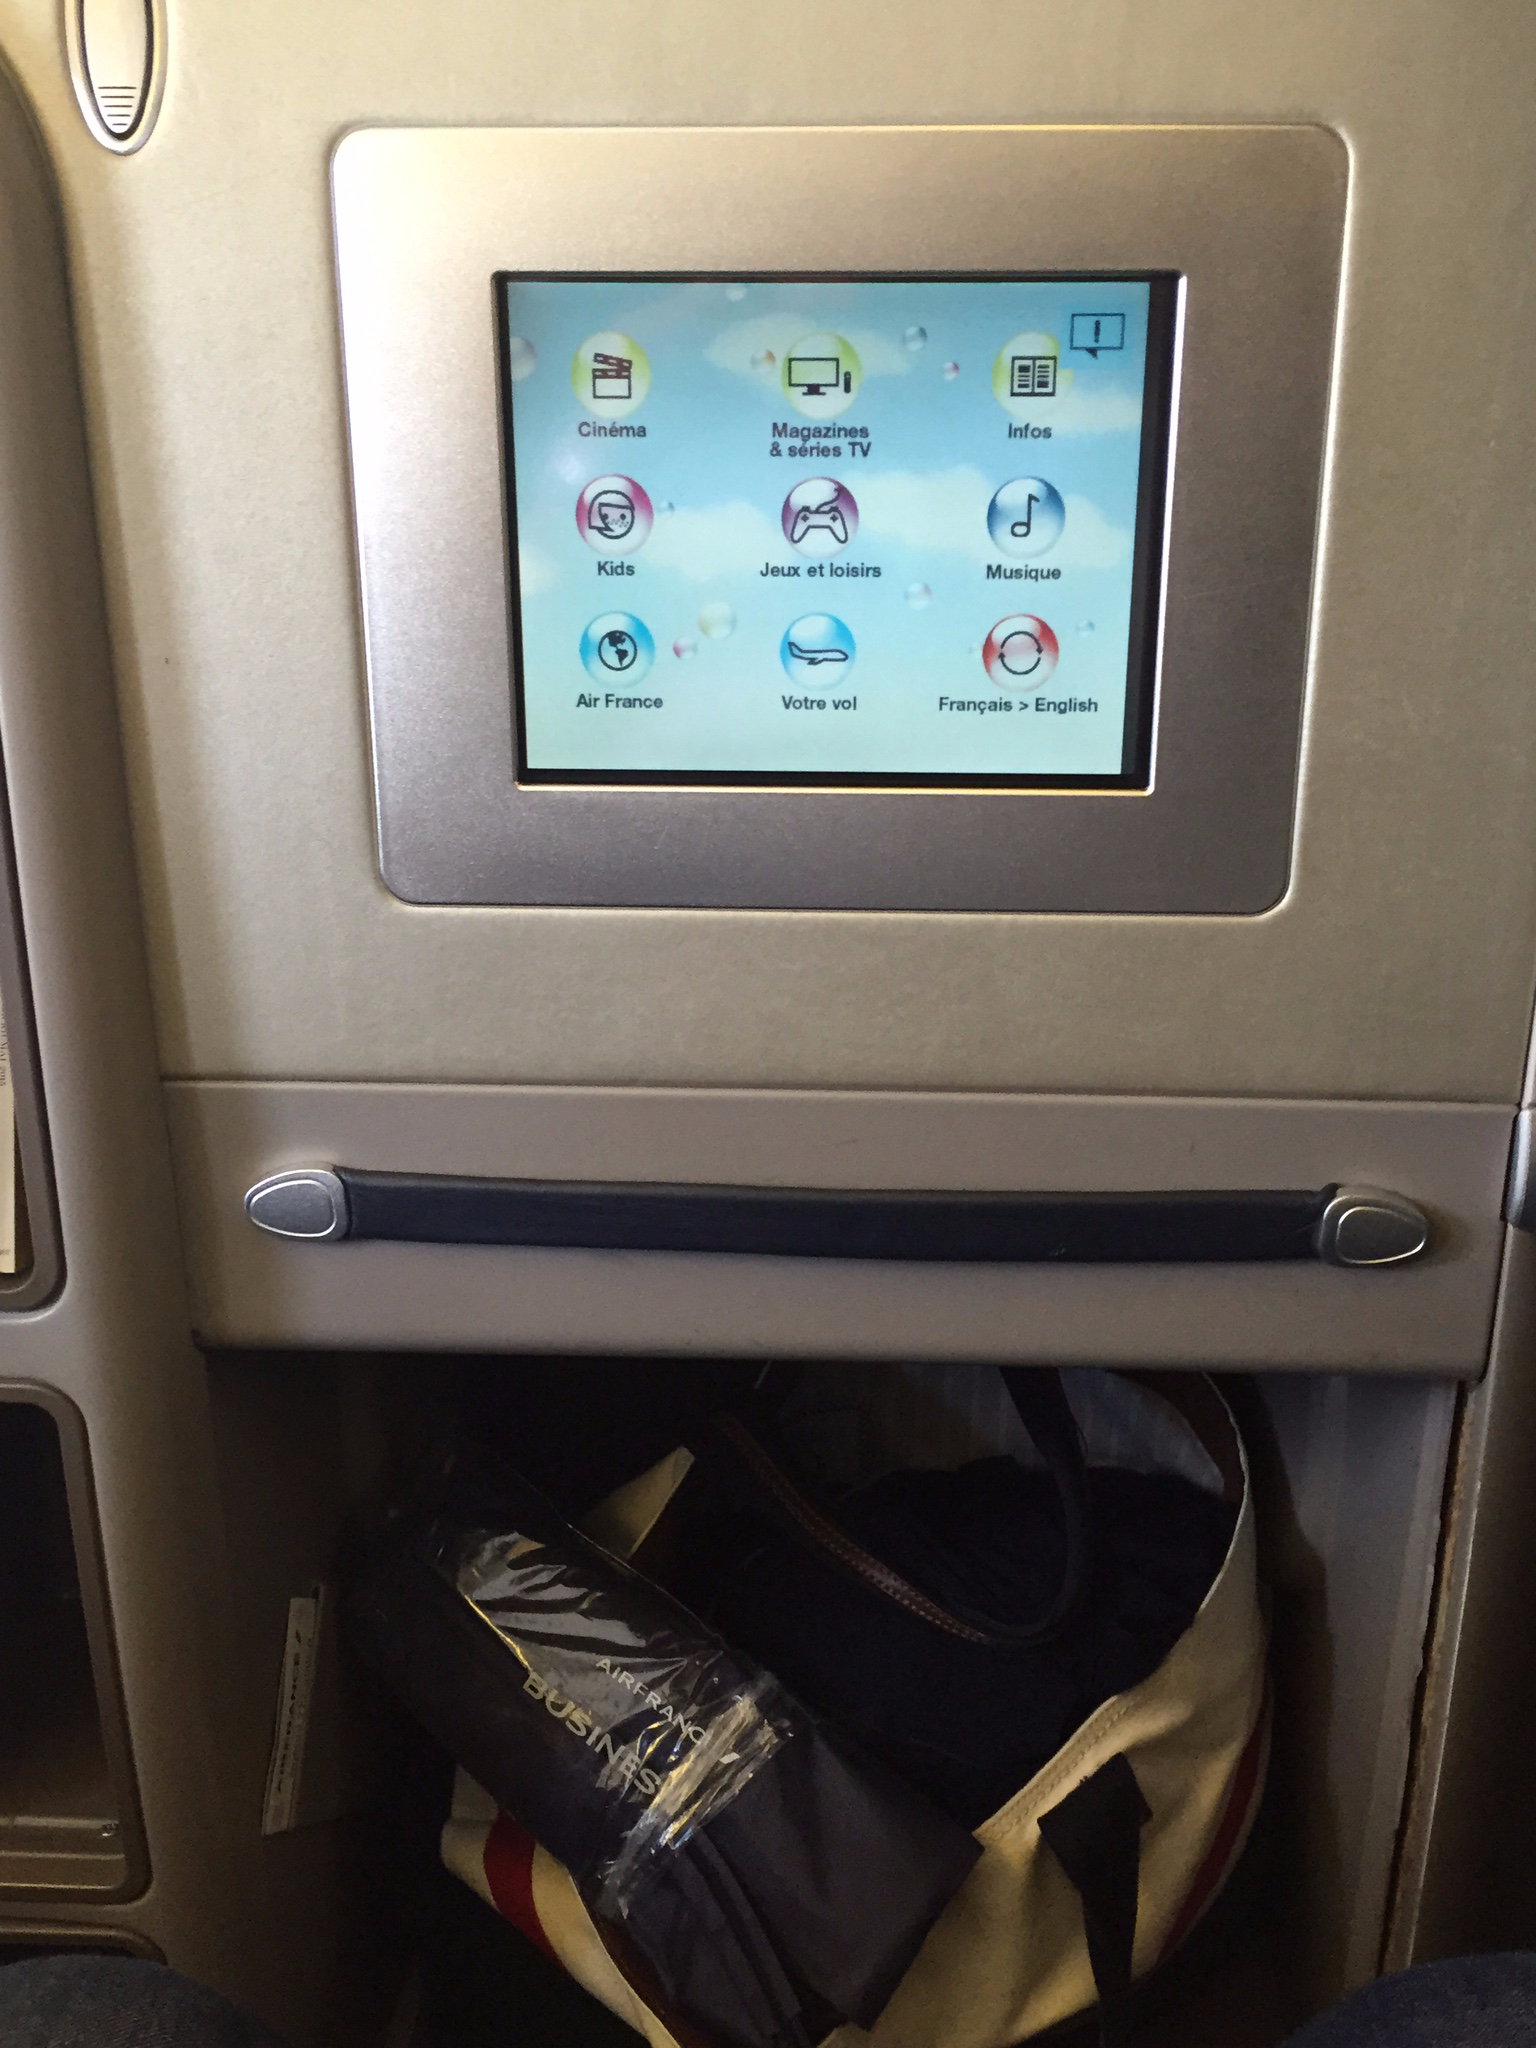 Air France business class seat 8B. Note the broken panel.